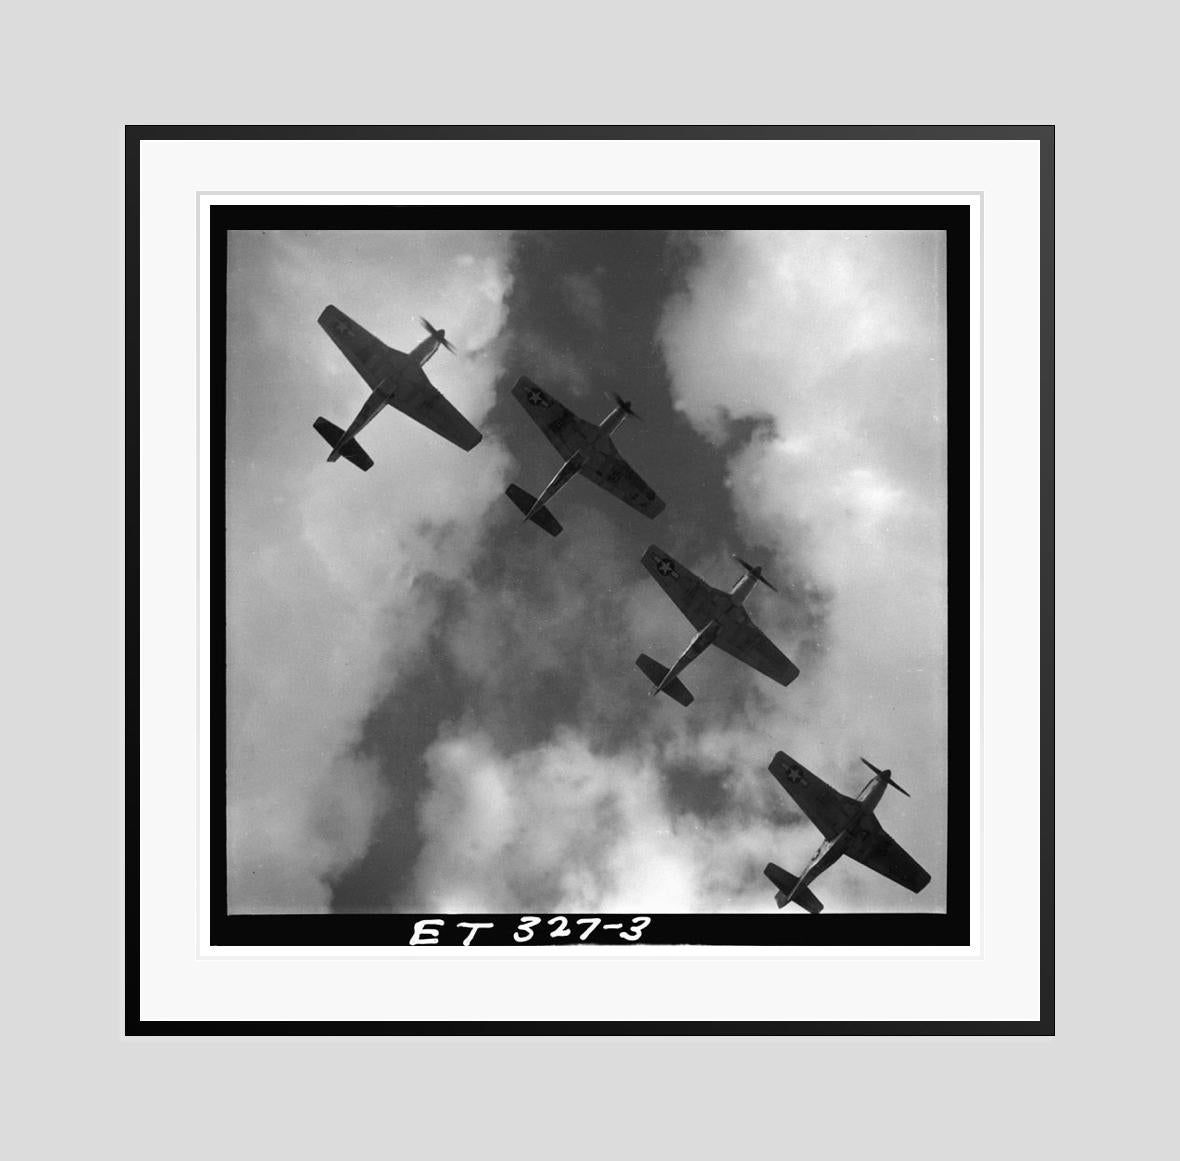 Mustangs In Flight 

1945 

Four P-51 Mustangs fly in formation, Ramitelli, Italy 1945

by Toni Frissell

30 x 30